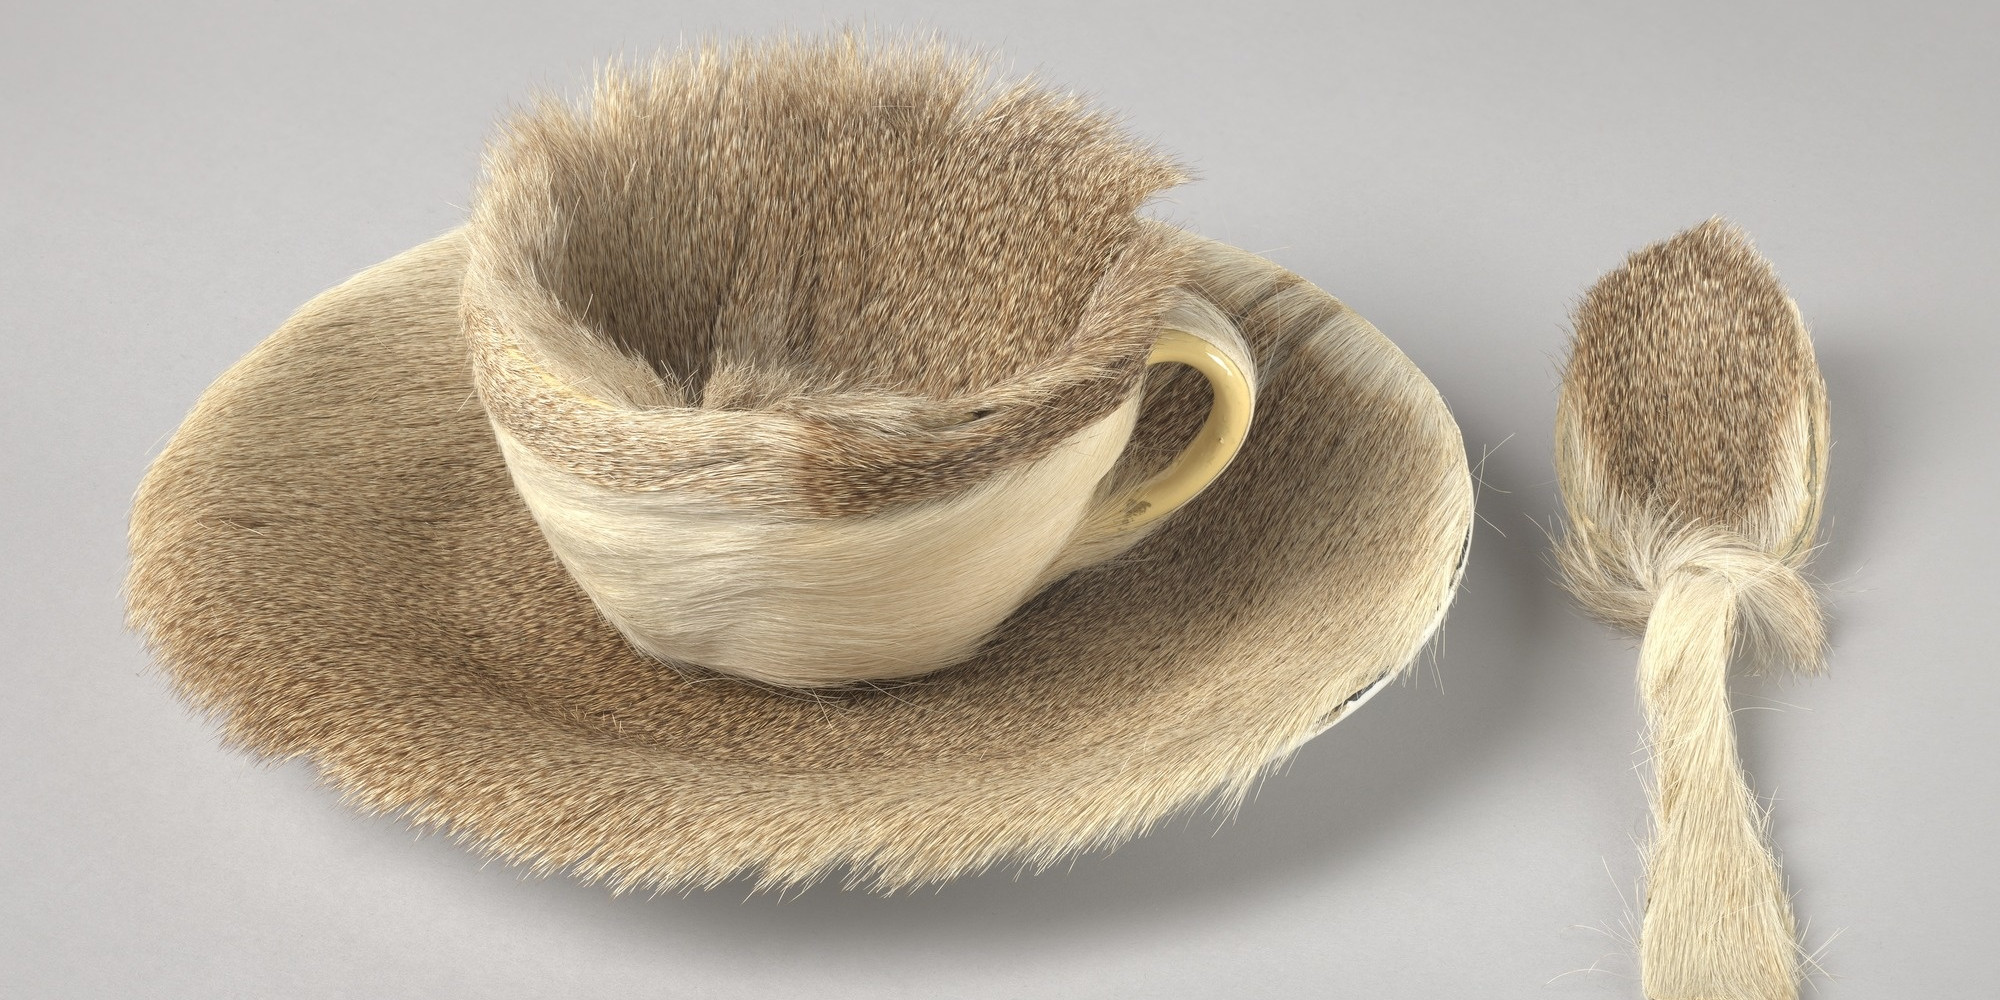 Meret Oppenheim. Object. 1936. Fur-covered cup, saucer, and spoon; cup 4 3/8&#34; (10.9 cm) in diameter; saucer 9 3/8&#34; (23.7 cm) in diameter; spoon 8&#34; (20.2 cm) long, overall height 2 7/8&#34; (7.3 cm). Purchase. © 2019 Artists Rights Society (ARS), New York/Pro Litteris, Zurich